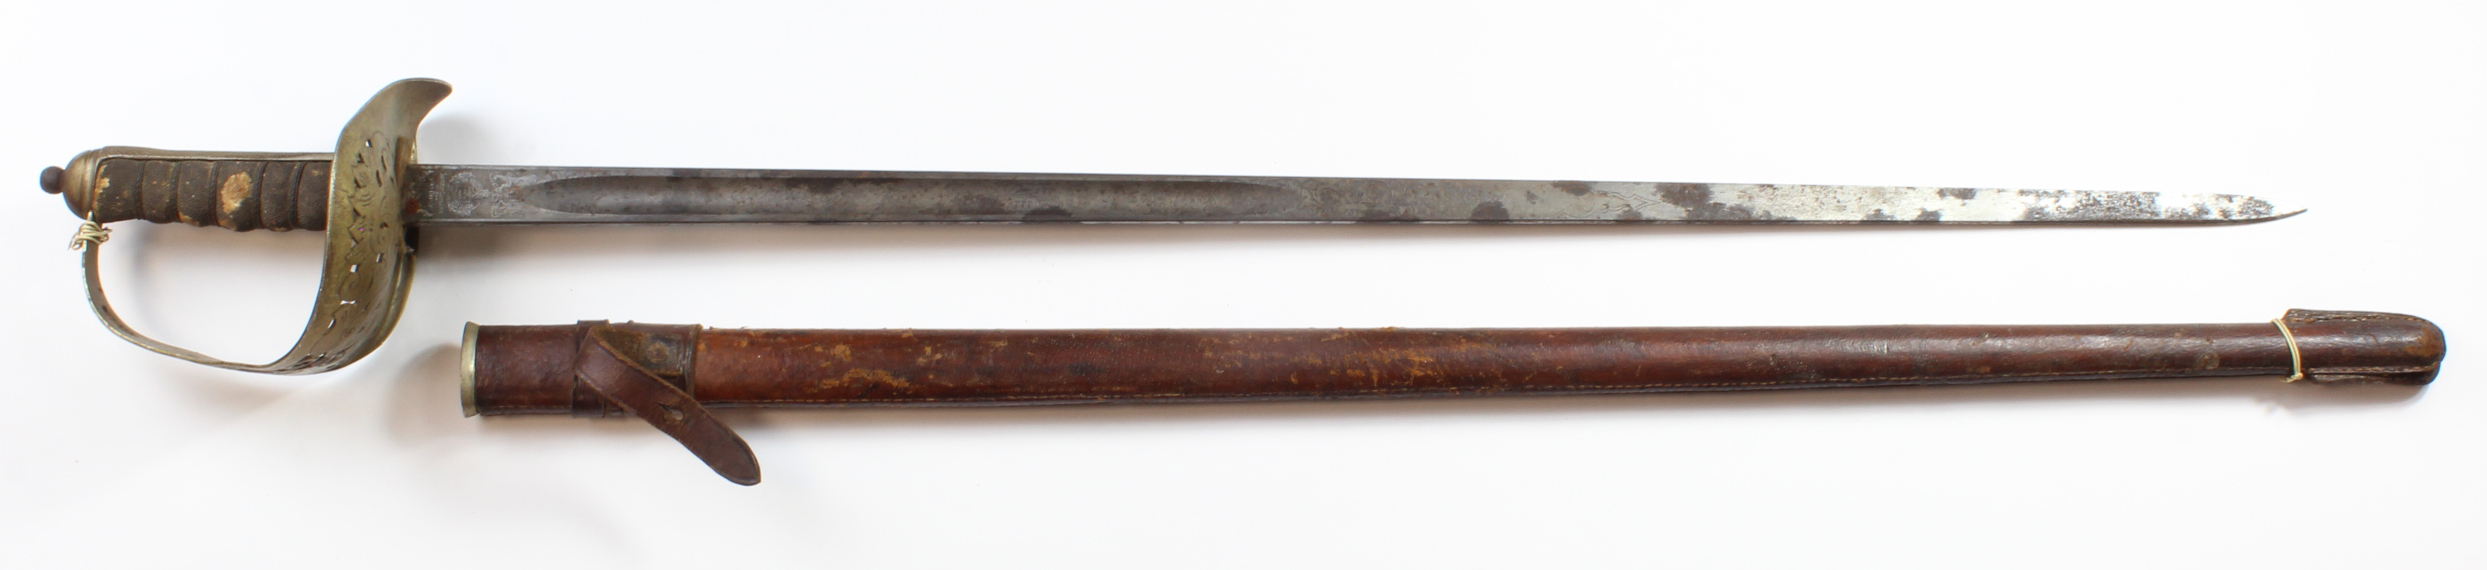 Sword: An 1897 Pattern Infantry Officers Sword with Geo V Cypher. Etched blade with Geo V.Cypher.